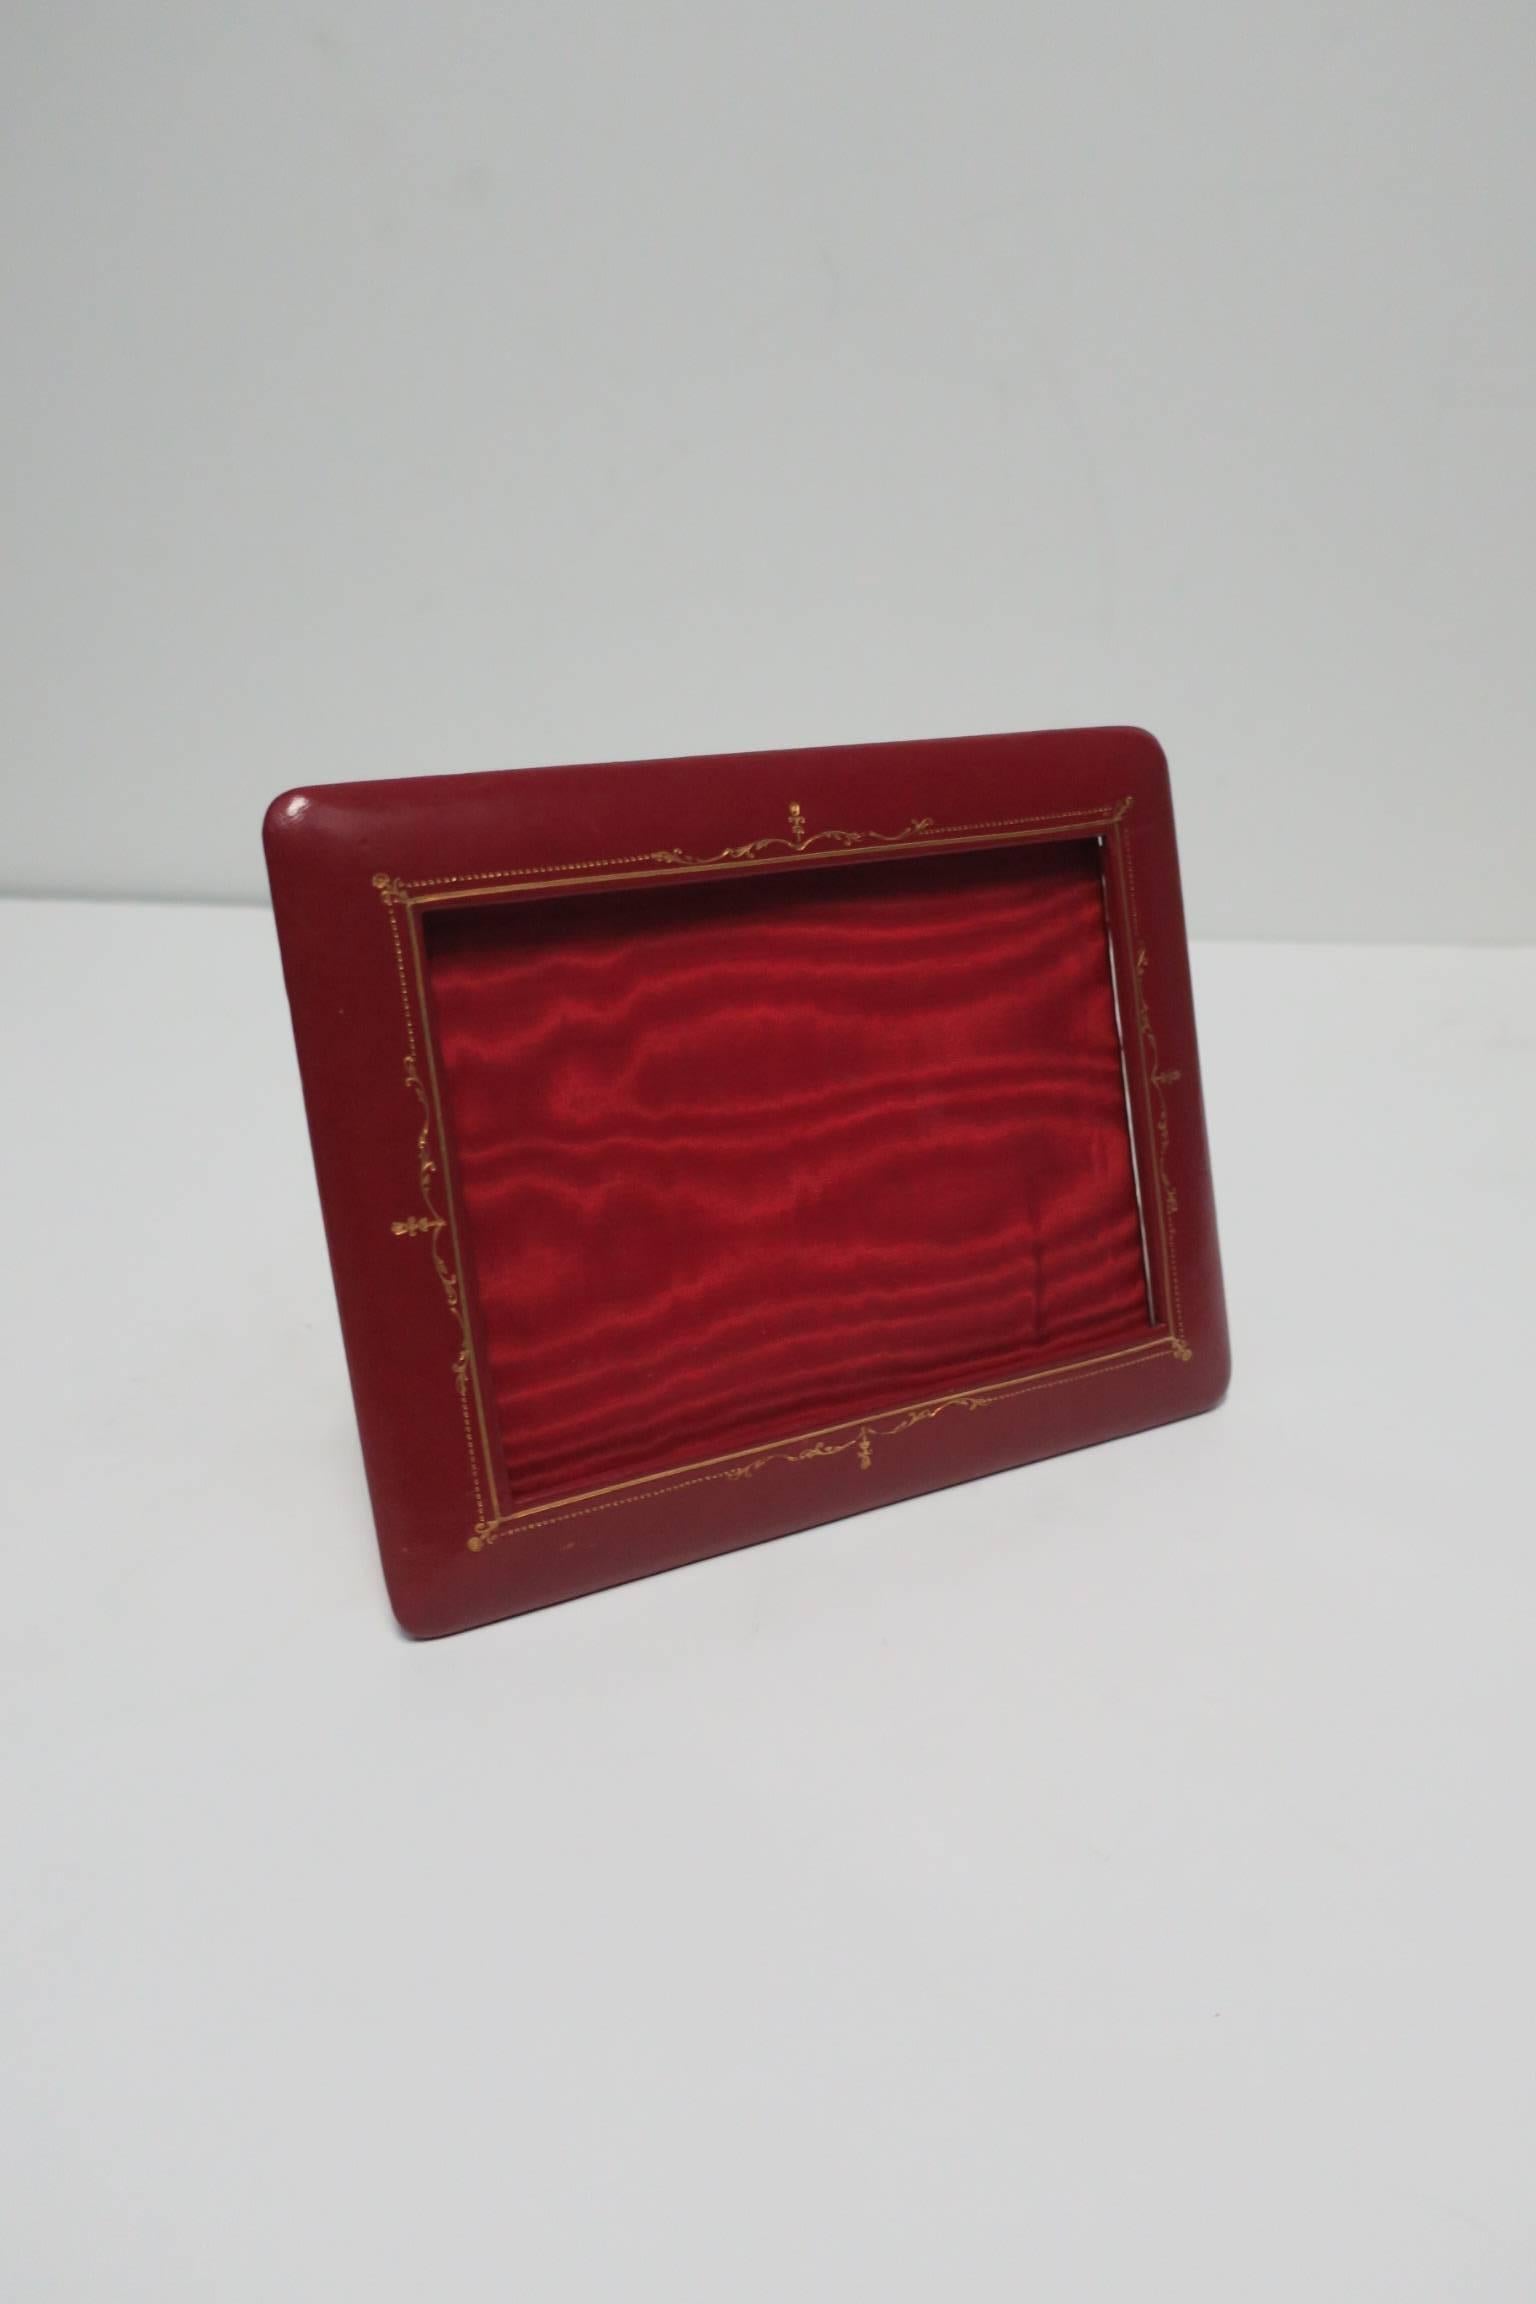 20th Century Vintage Italian Red and Gold Leather Picture Frame, Italy